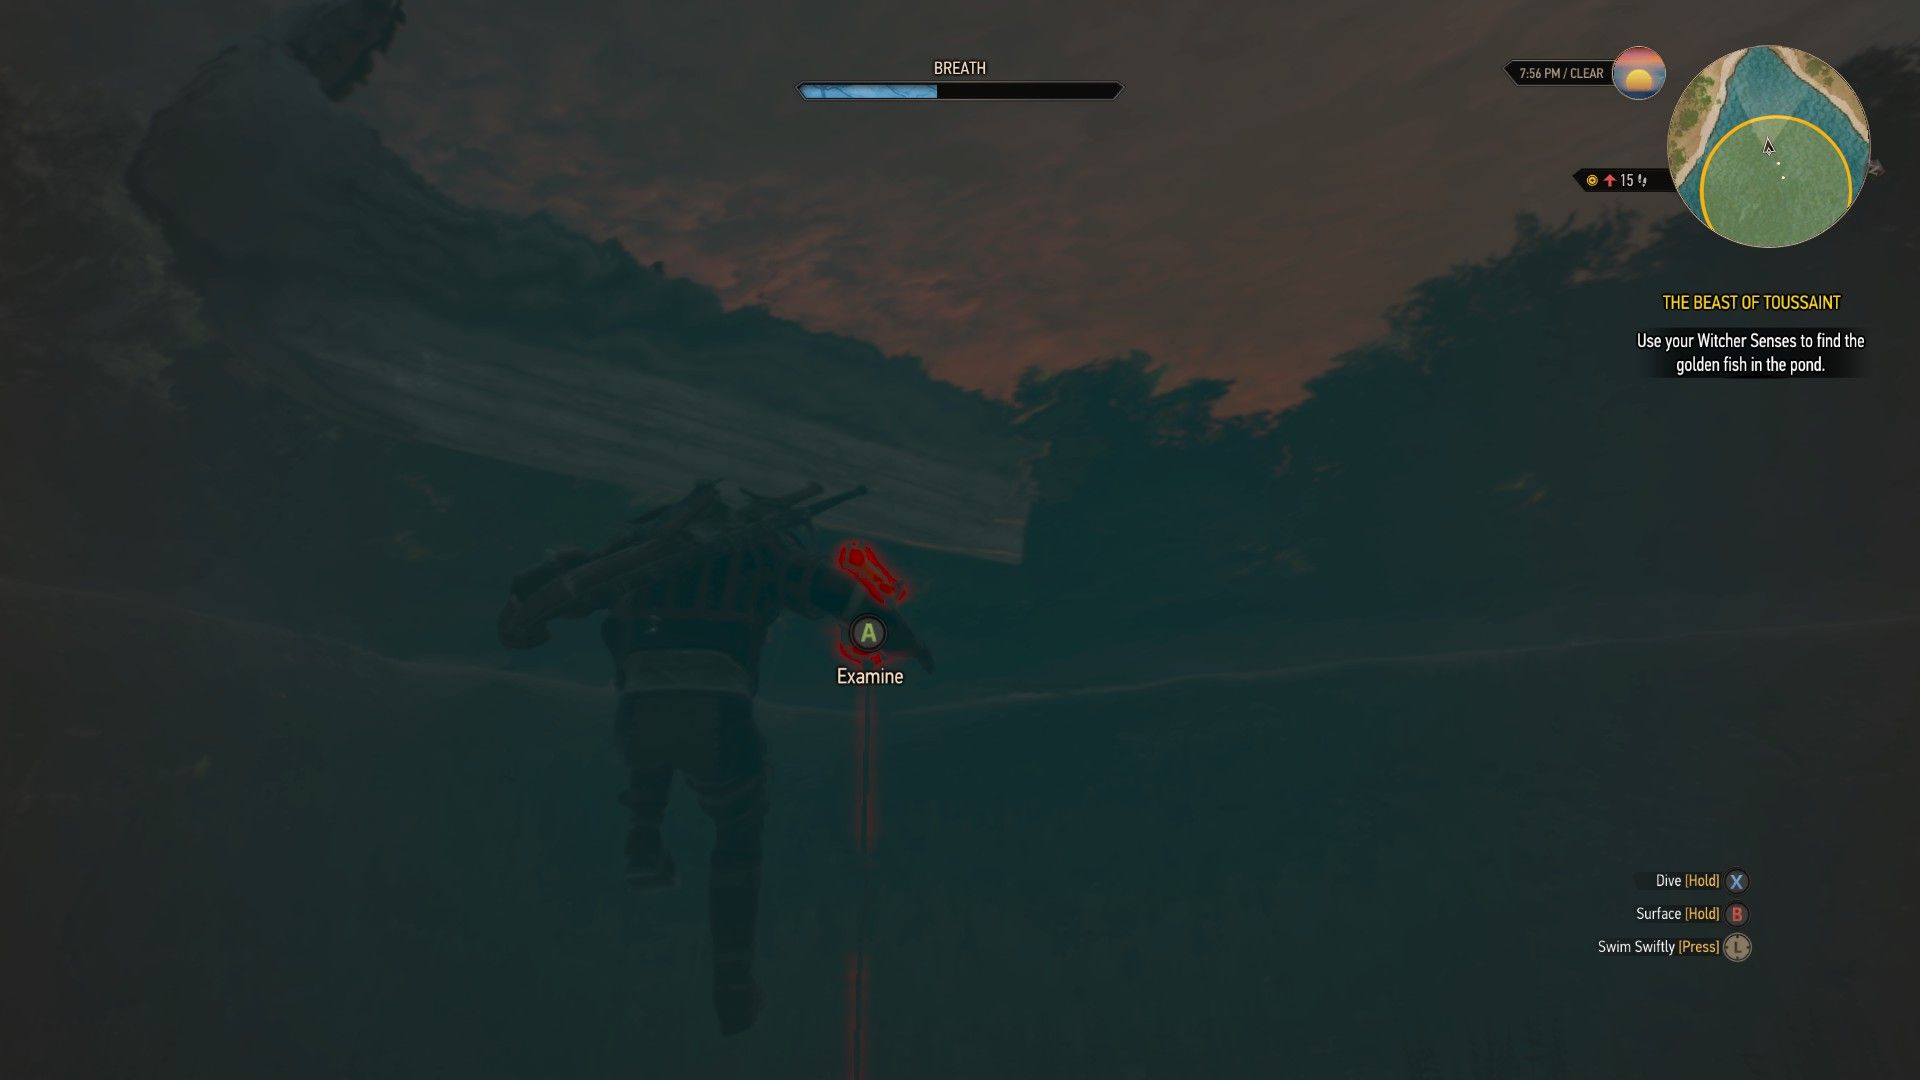 A screenshot of Geralt swimming next to a golden fish, highlighted in red for his witcher senses.